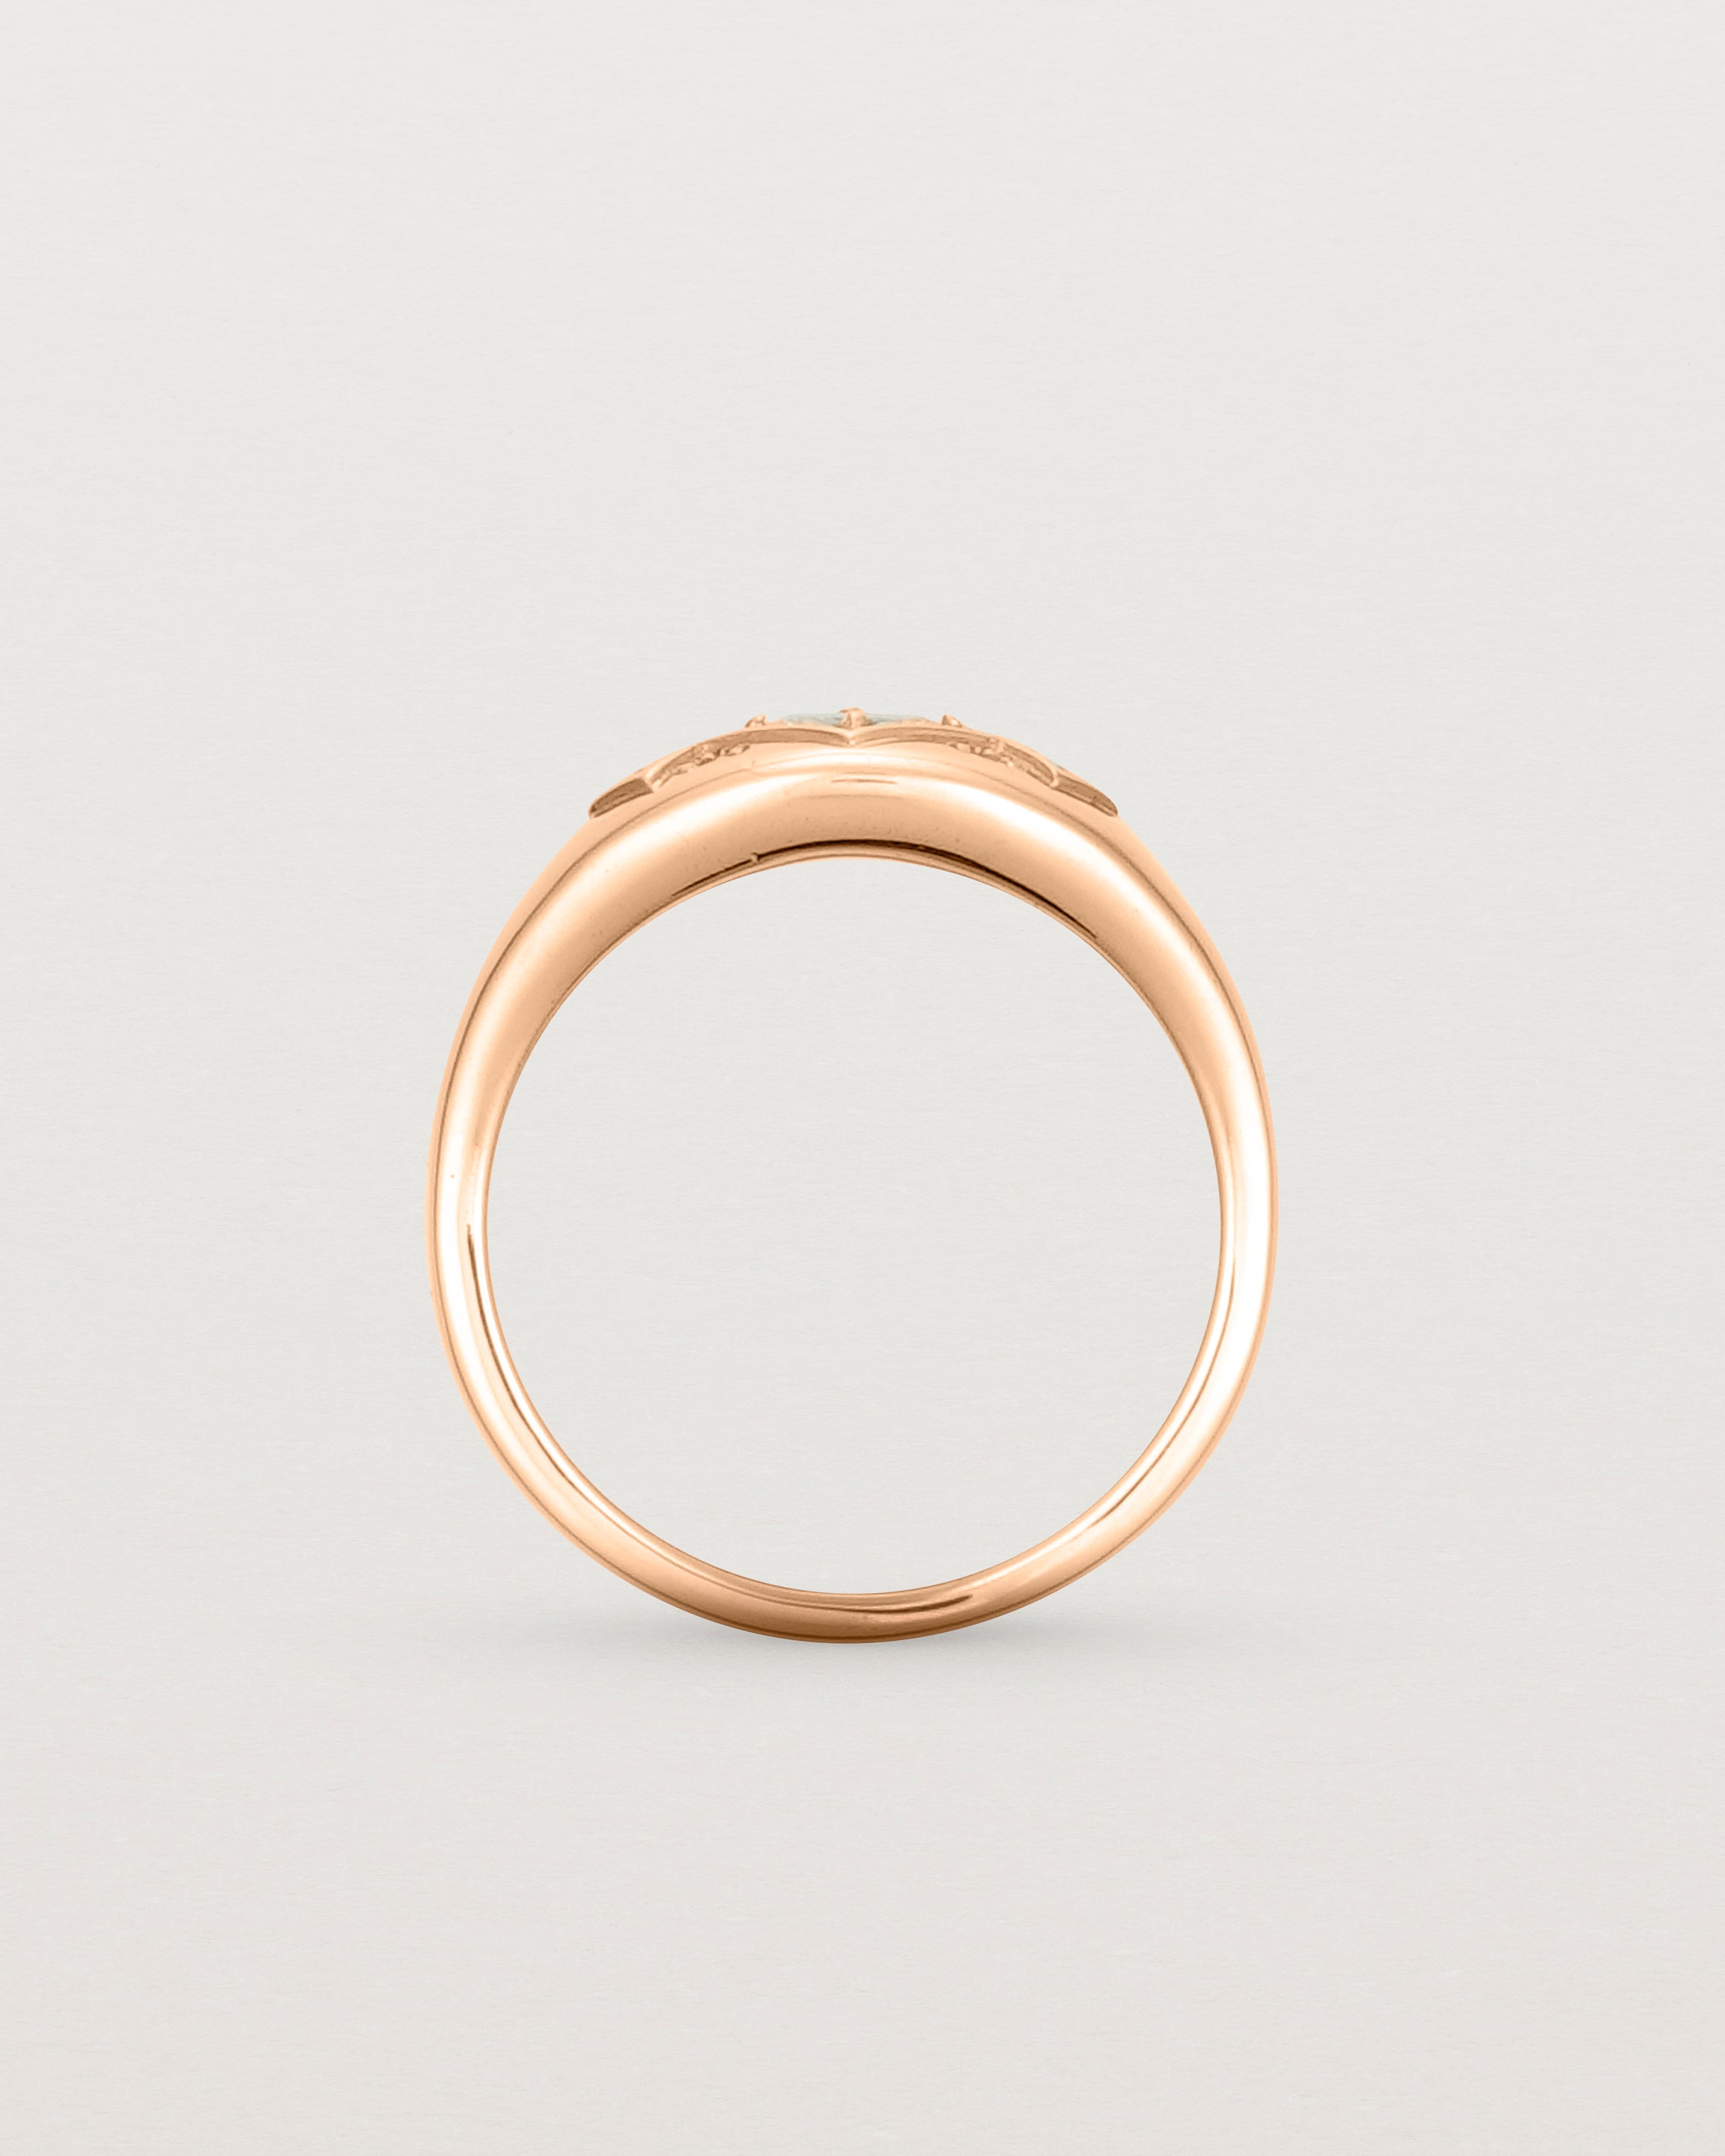 Standing view of the Seule Cheri Ring | Diamonds | Rose Gold.